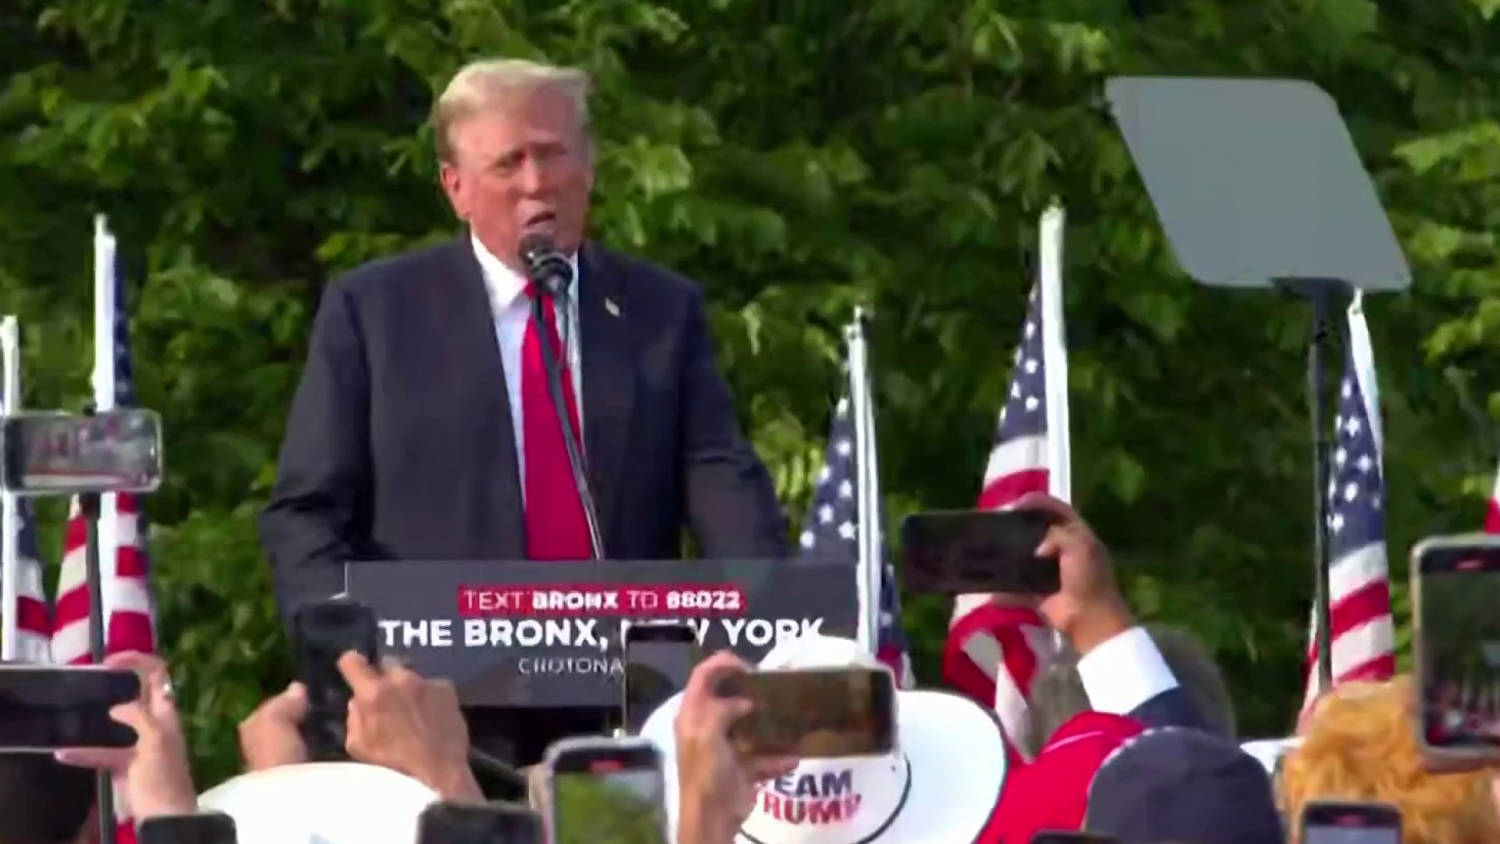 Trump holds campaign rally in the Bronx